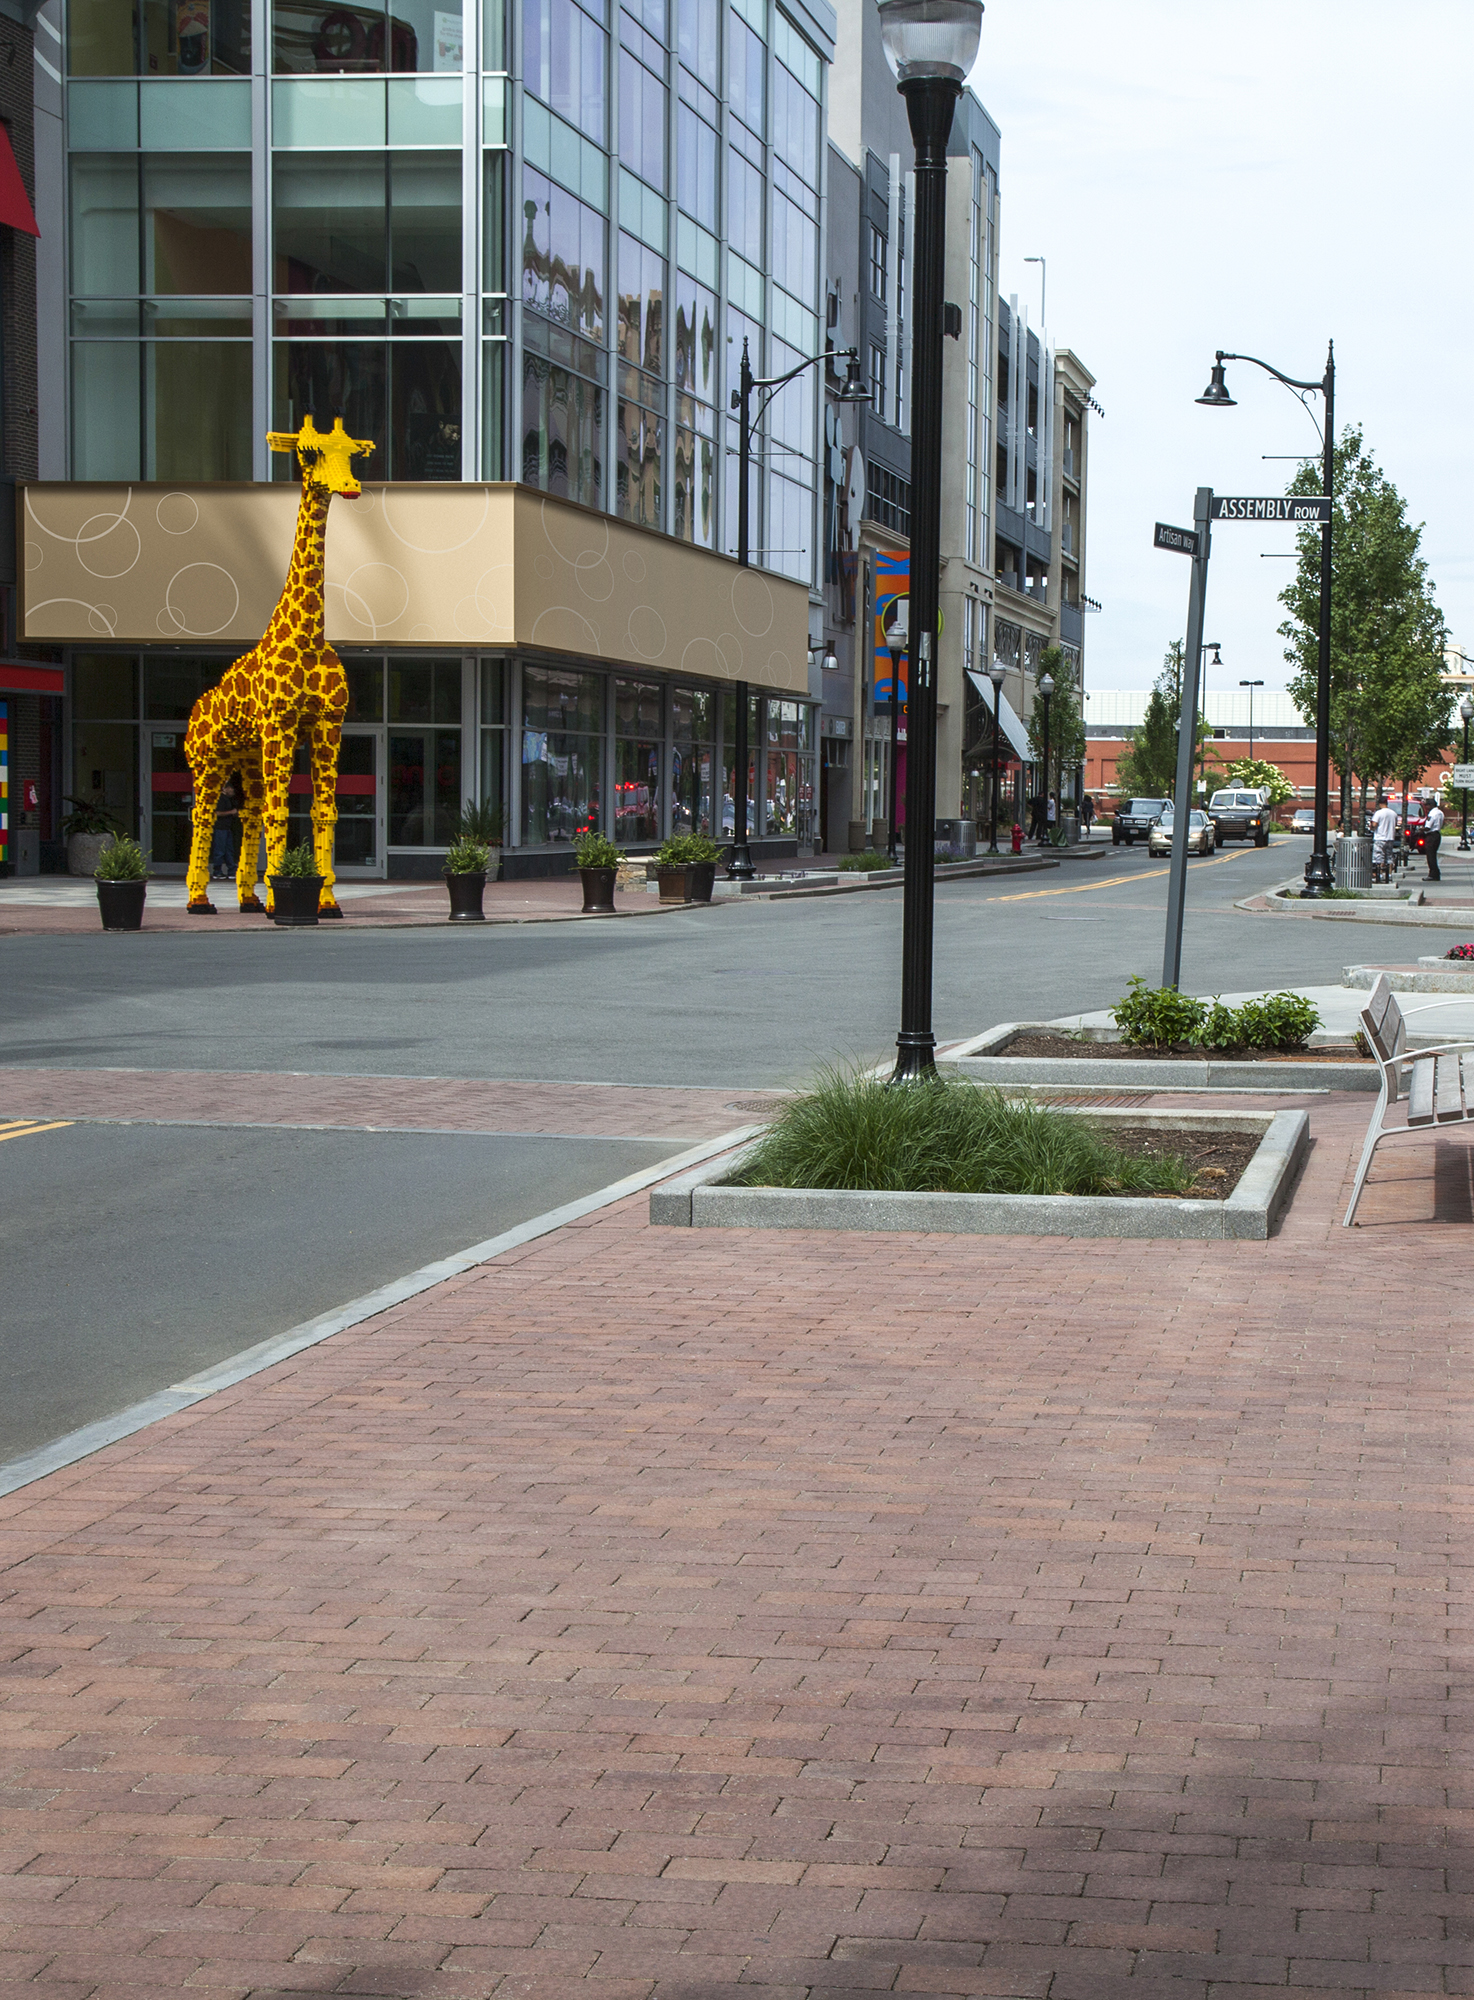 A large giraffe sculpture stands on the corner of Assembly Row with pedestrian areas delineated in Il campo pavers.